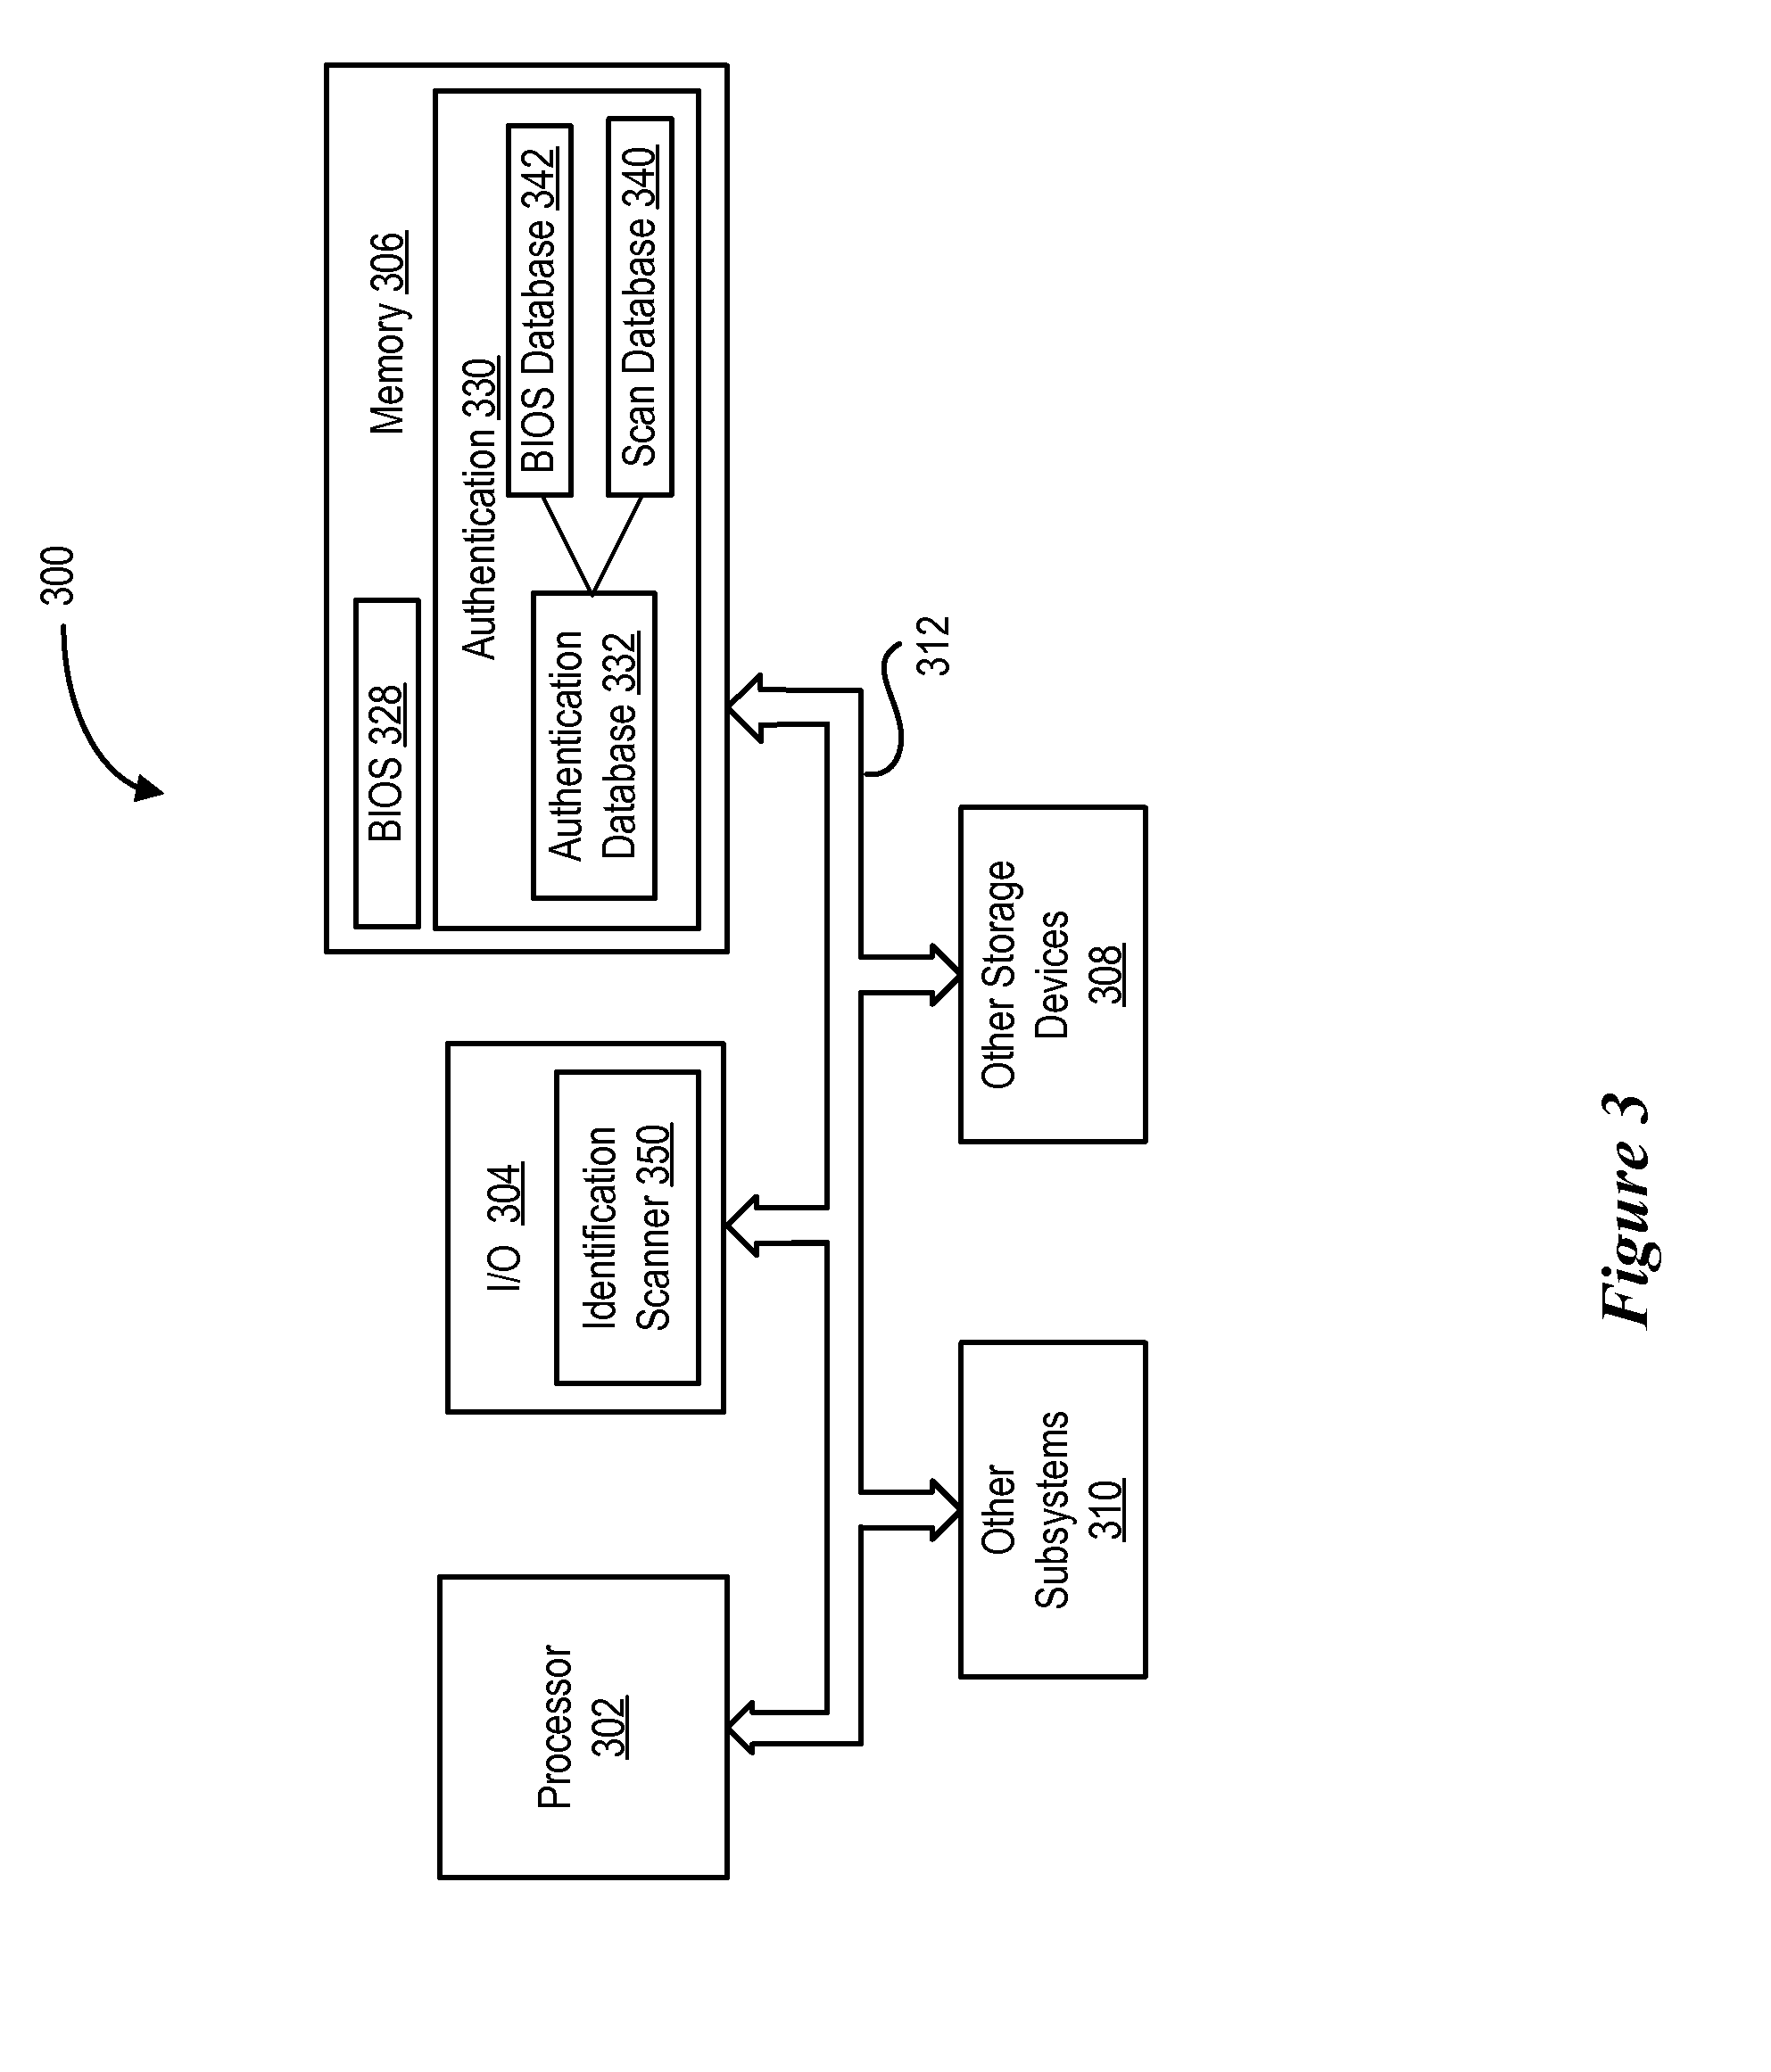 System and Method for Enrolling Users in a Pre-Boot Authentication Feature